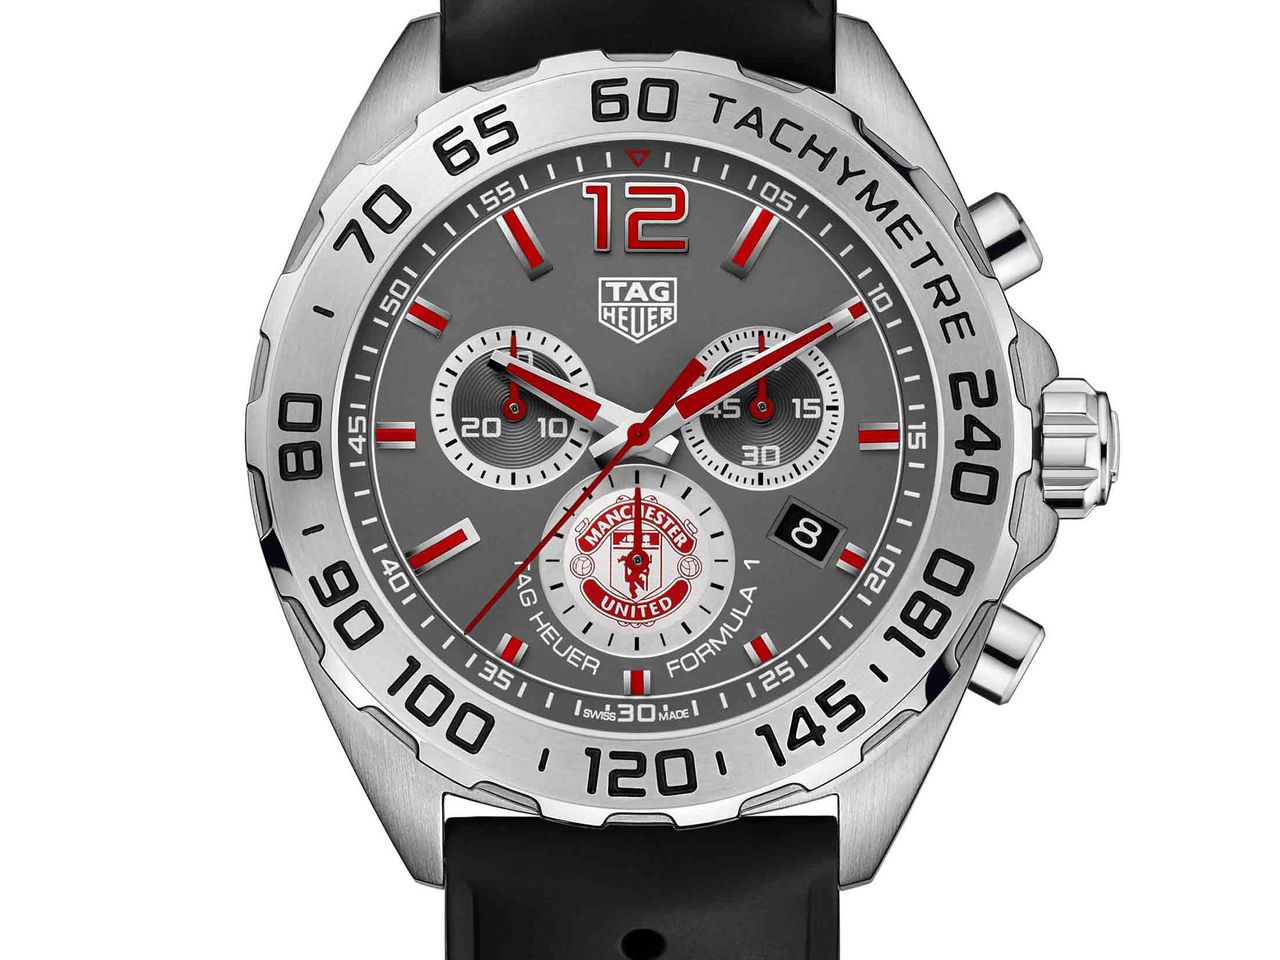 Exclusive TAG Heuer United watches available in Old Trafford Megastore Manchester United